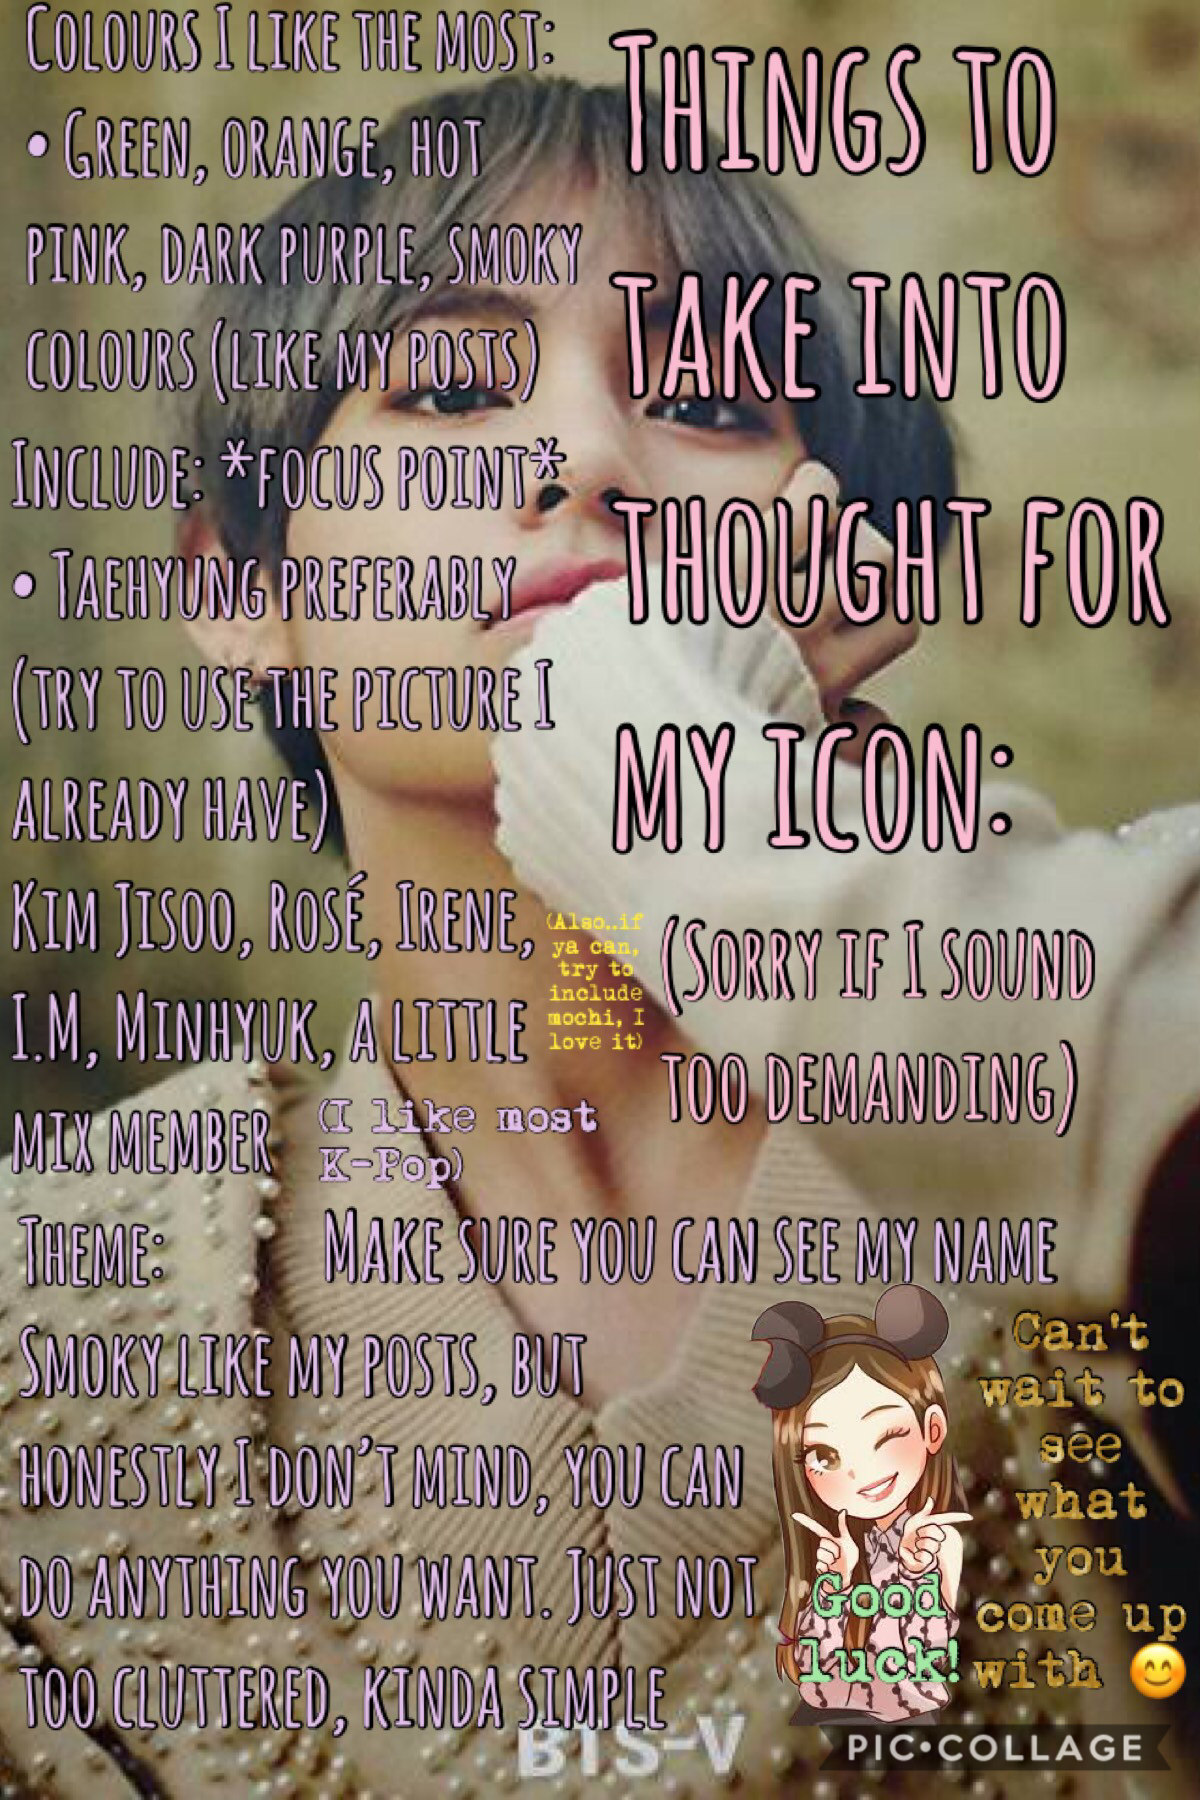 Here you go :D
The contest will end at the end of the month.
Prizes won’t be that good but I’ll try :|